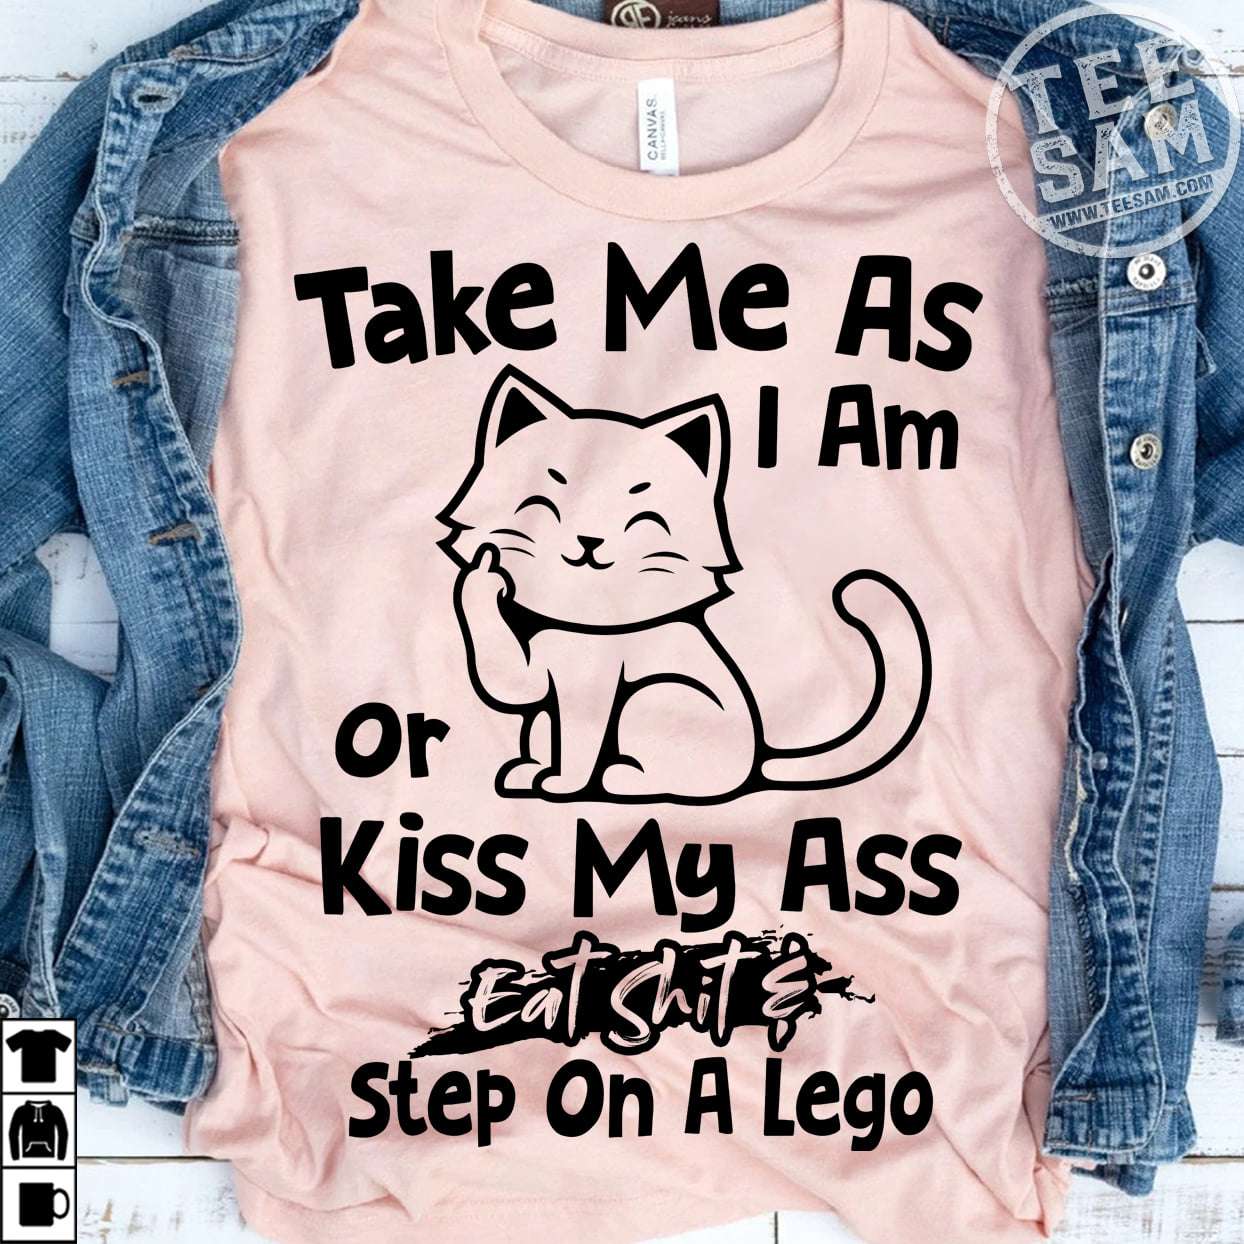 Bad Cat - Take me as i am or kiss amy ass eat shit and step on a lego